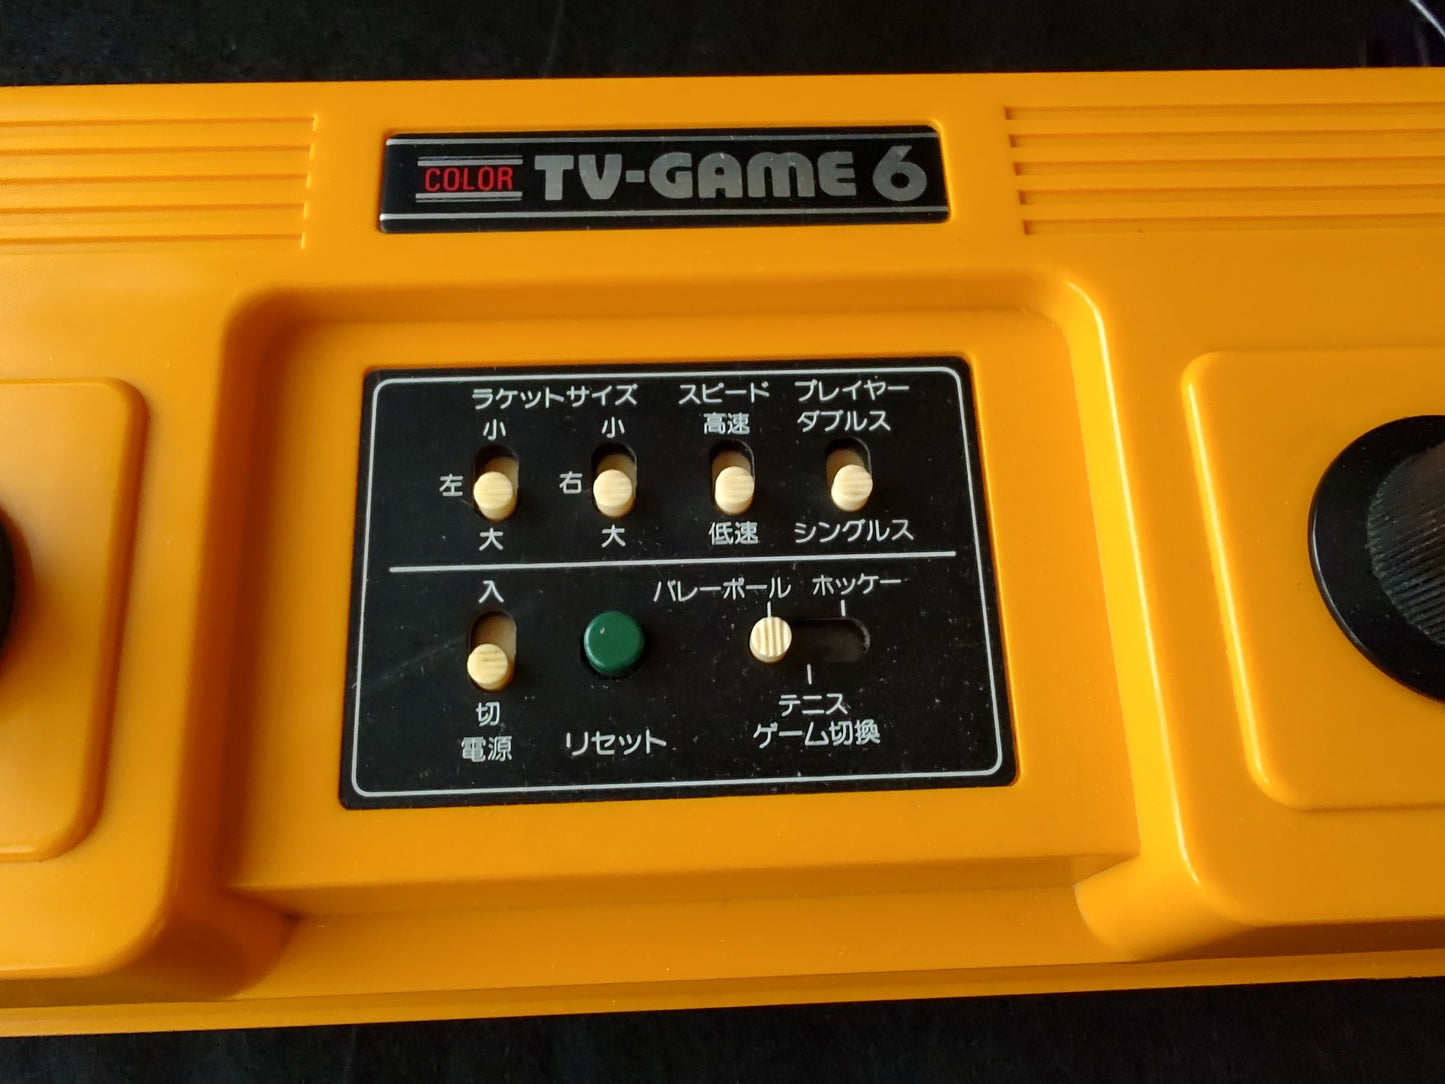 Nintendo TV GAME 6 (CTG-6V) Console,RF switch,Manual,Boxed set Tested-f0529-